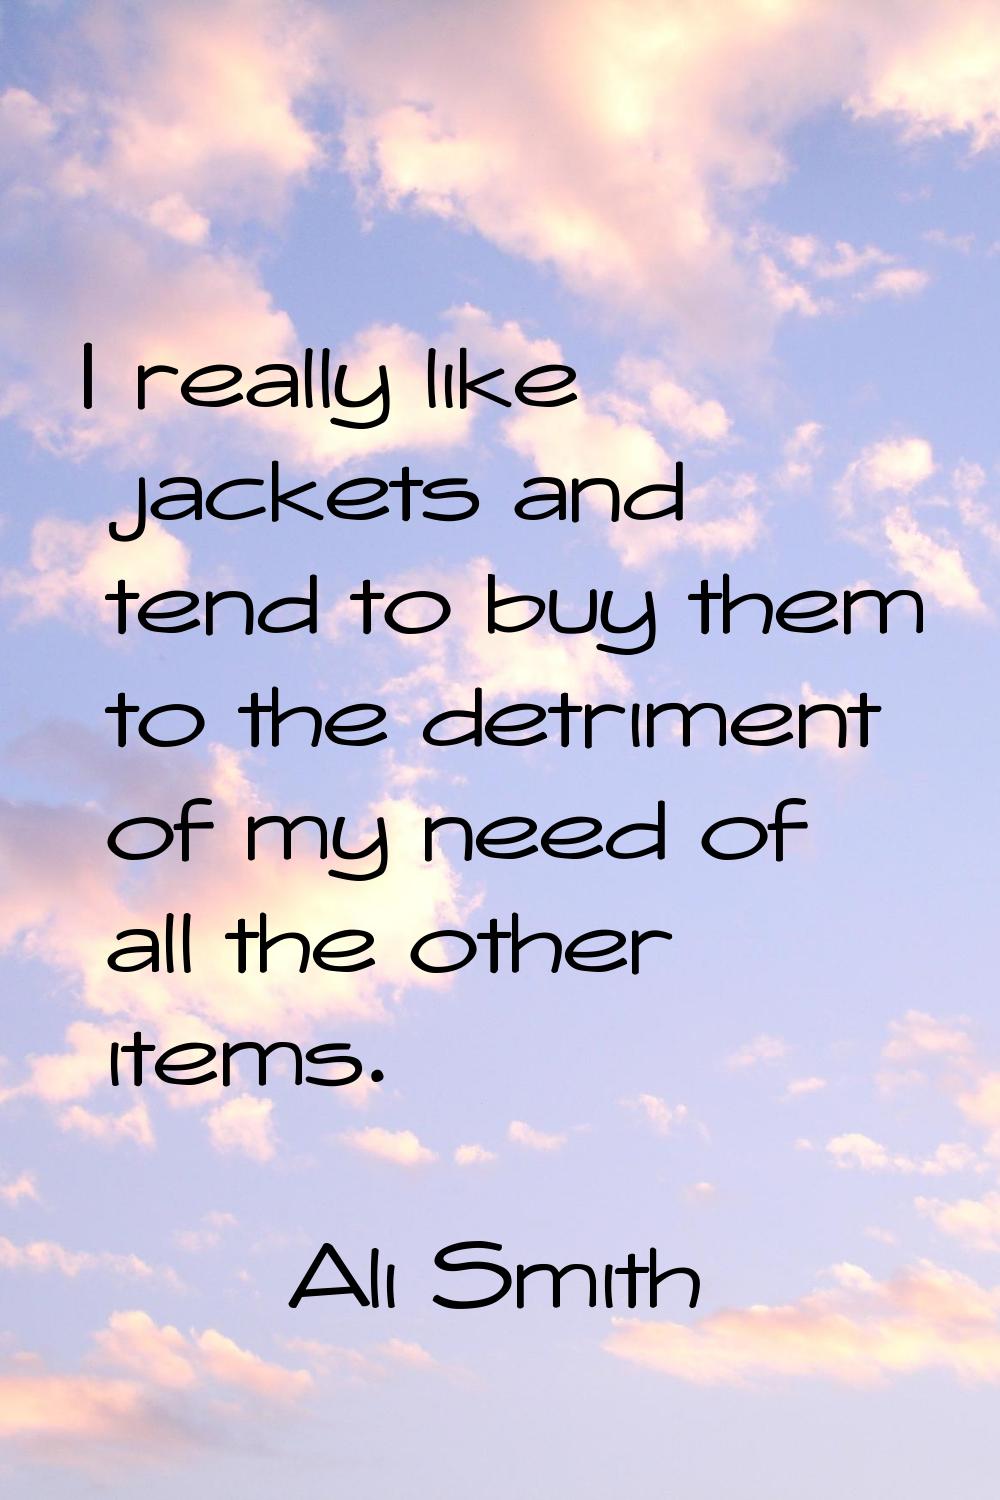 I really like jackets and tend to buy them to the detriment of my need of all the other items.